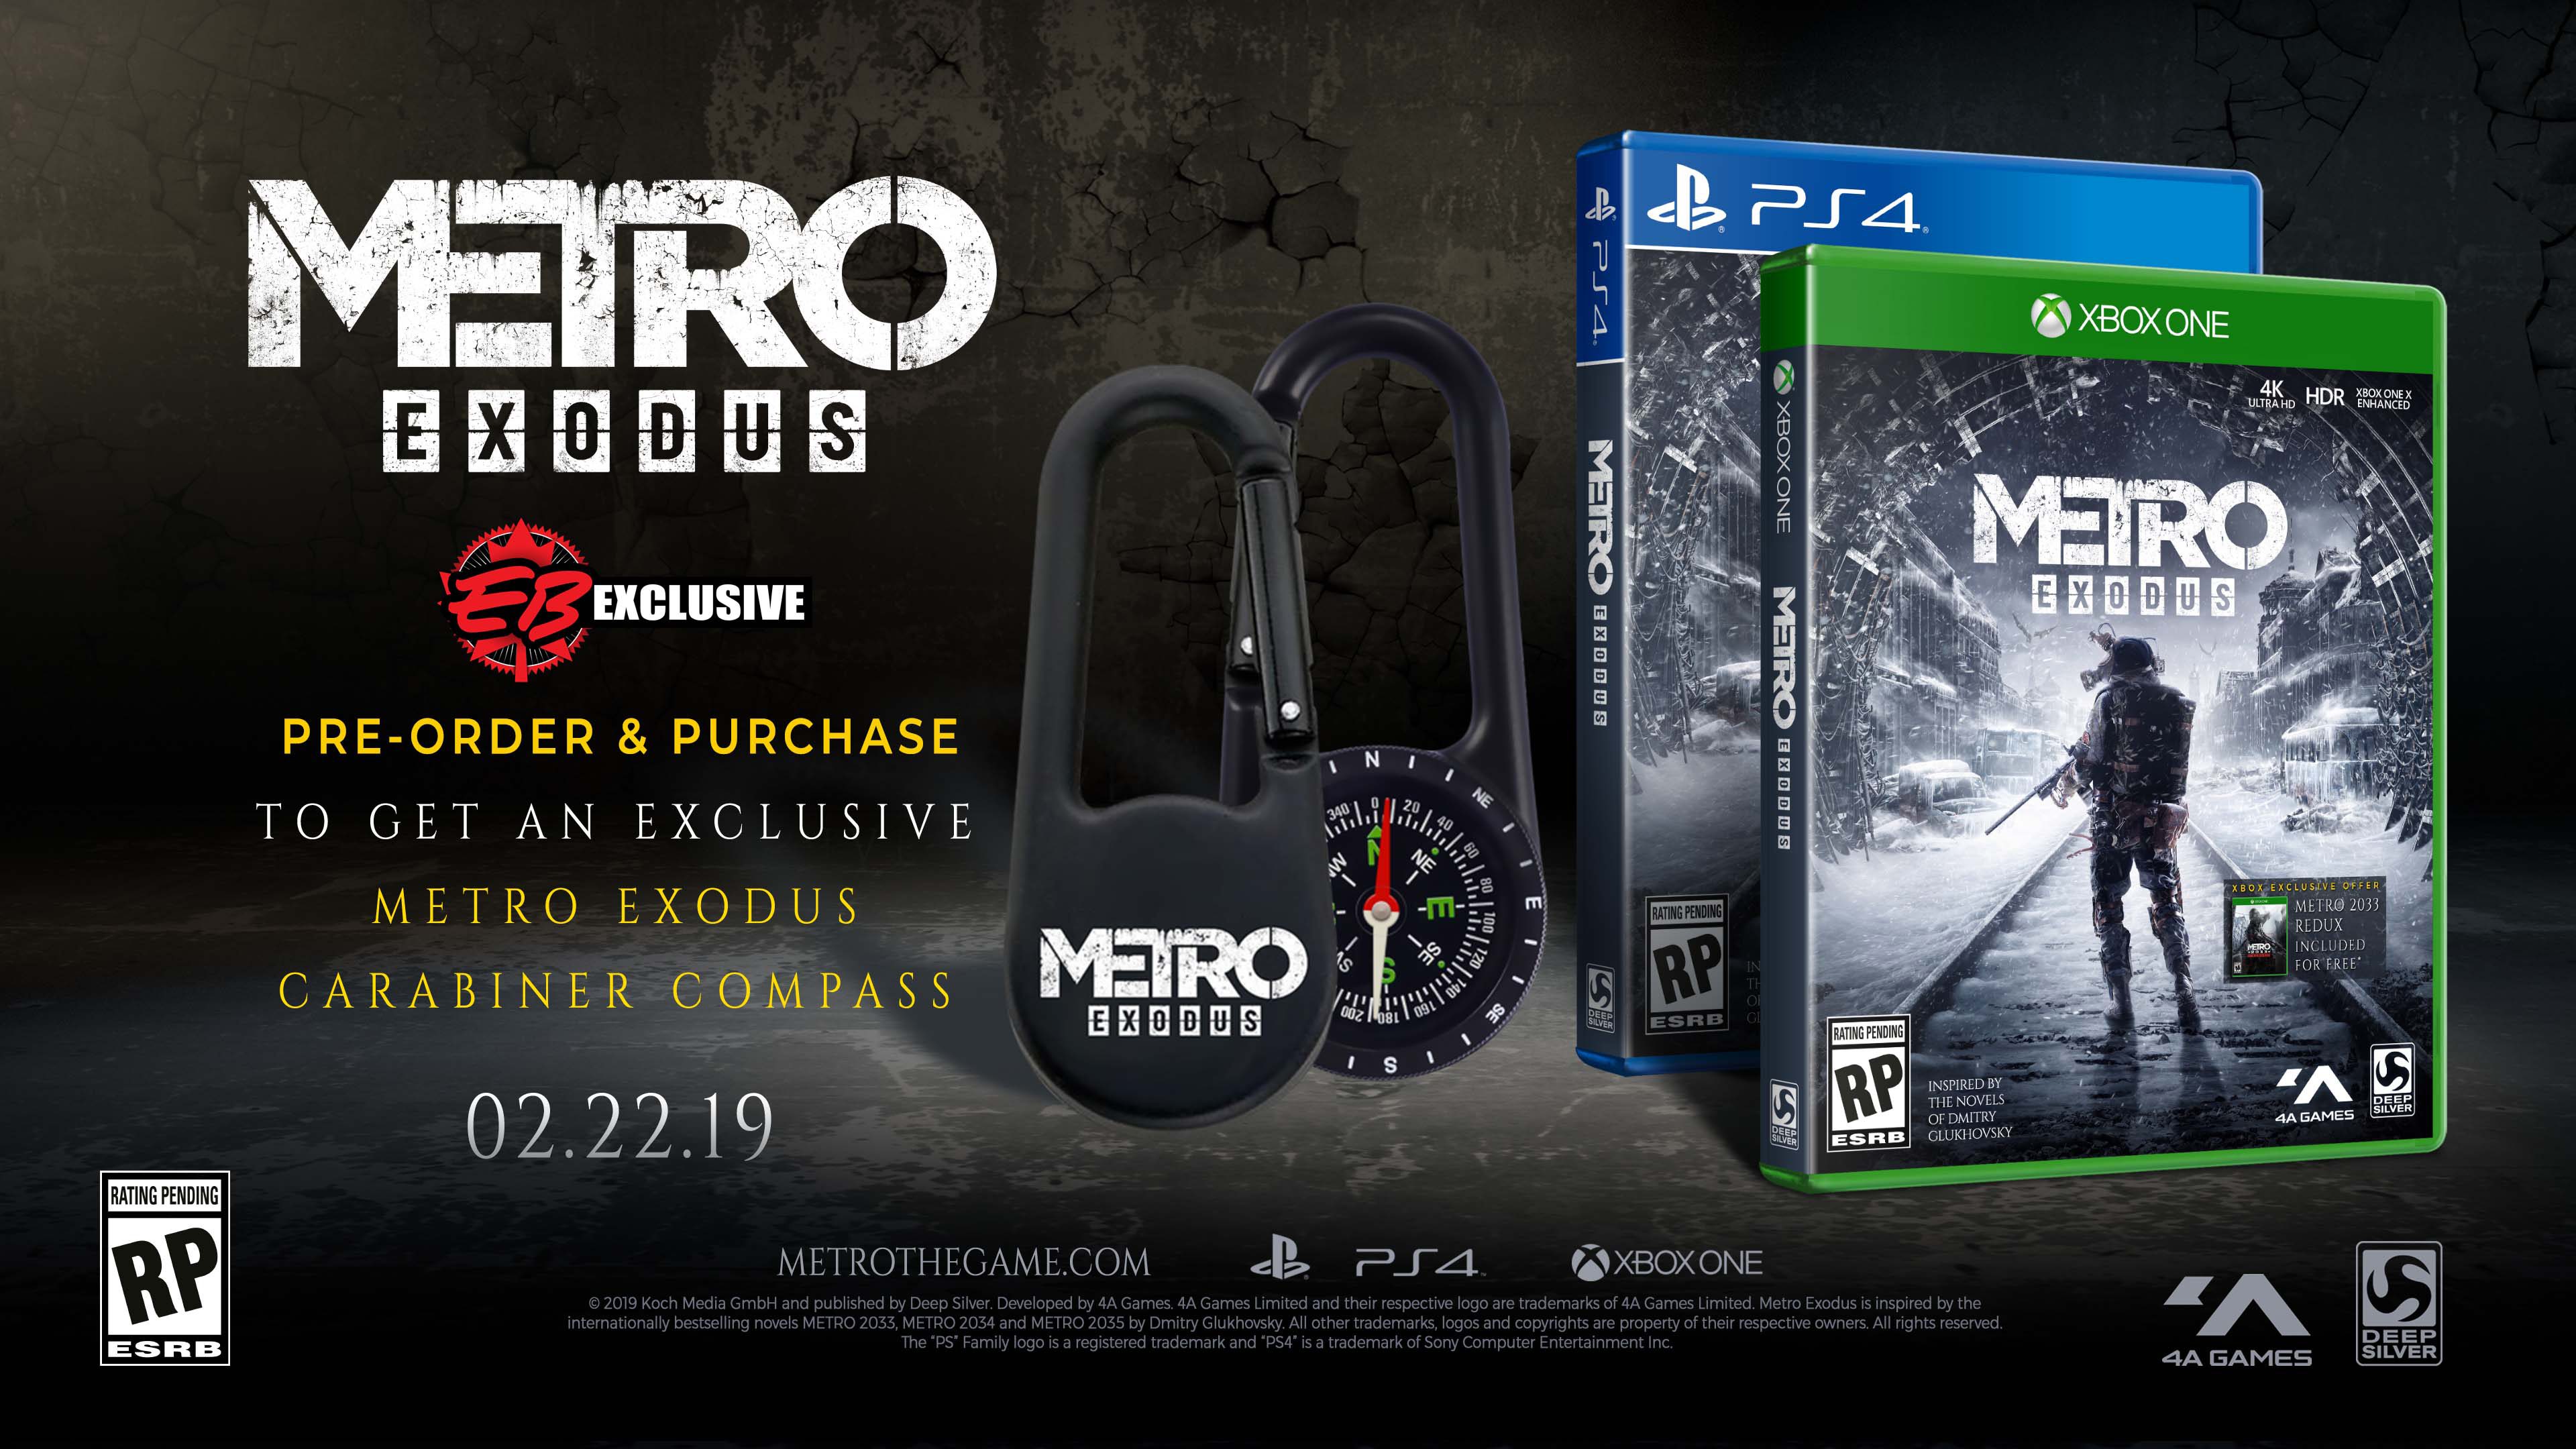 Carabineer Compass Available with Pre-Order of Metro Exodus at Gamestop